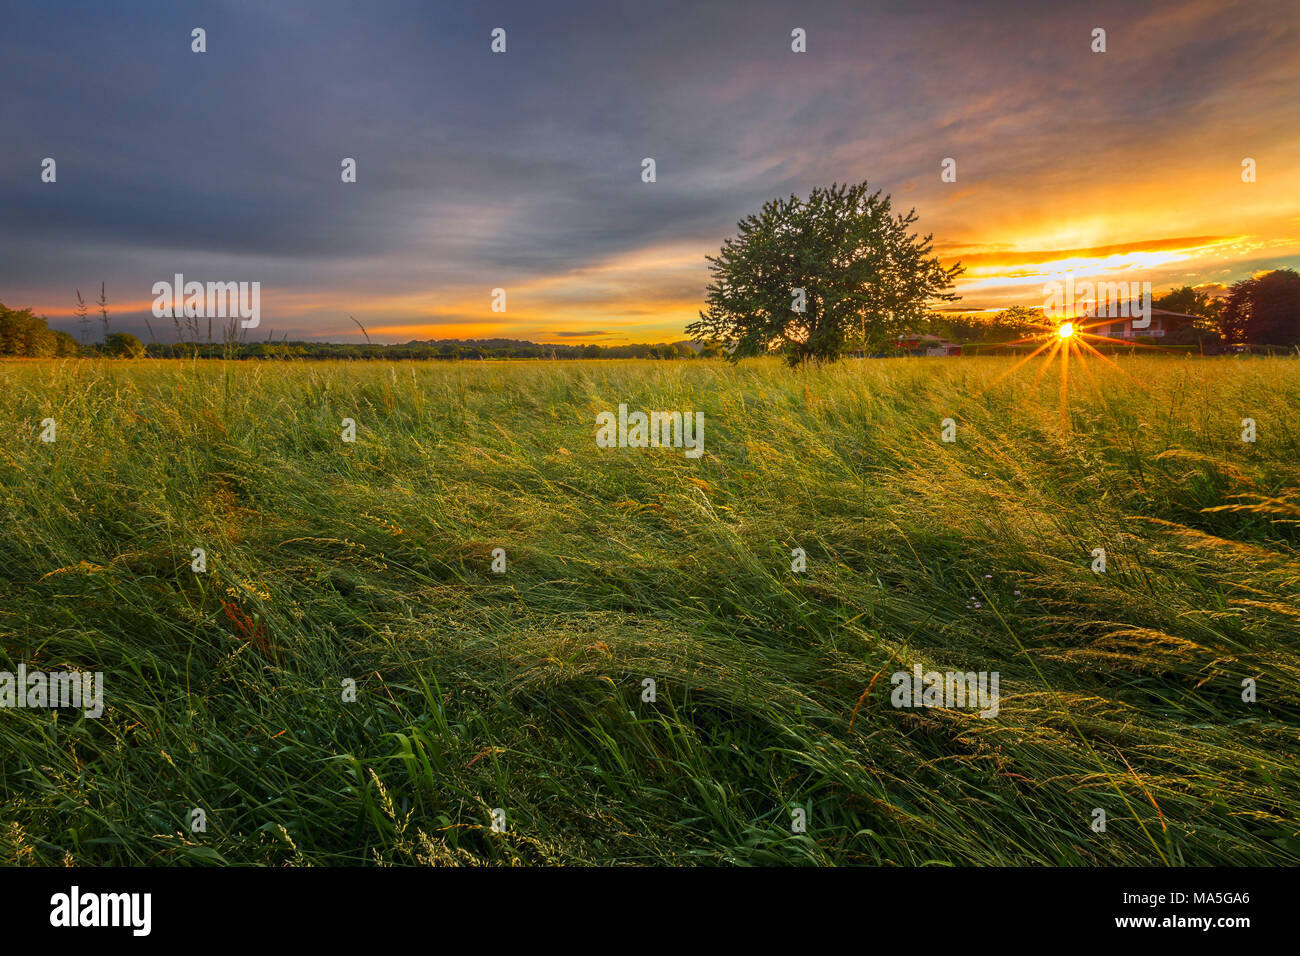 Lonely tree in a field at sunset, Como province, Lombardy, Italy, Europe Stock Photo